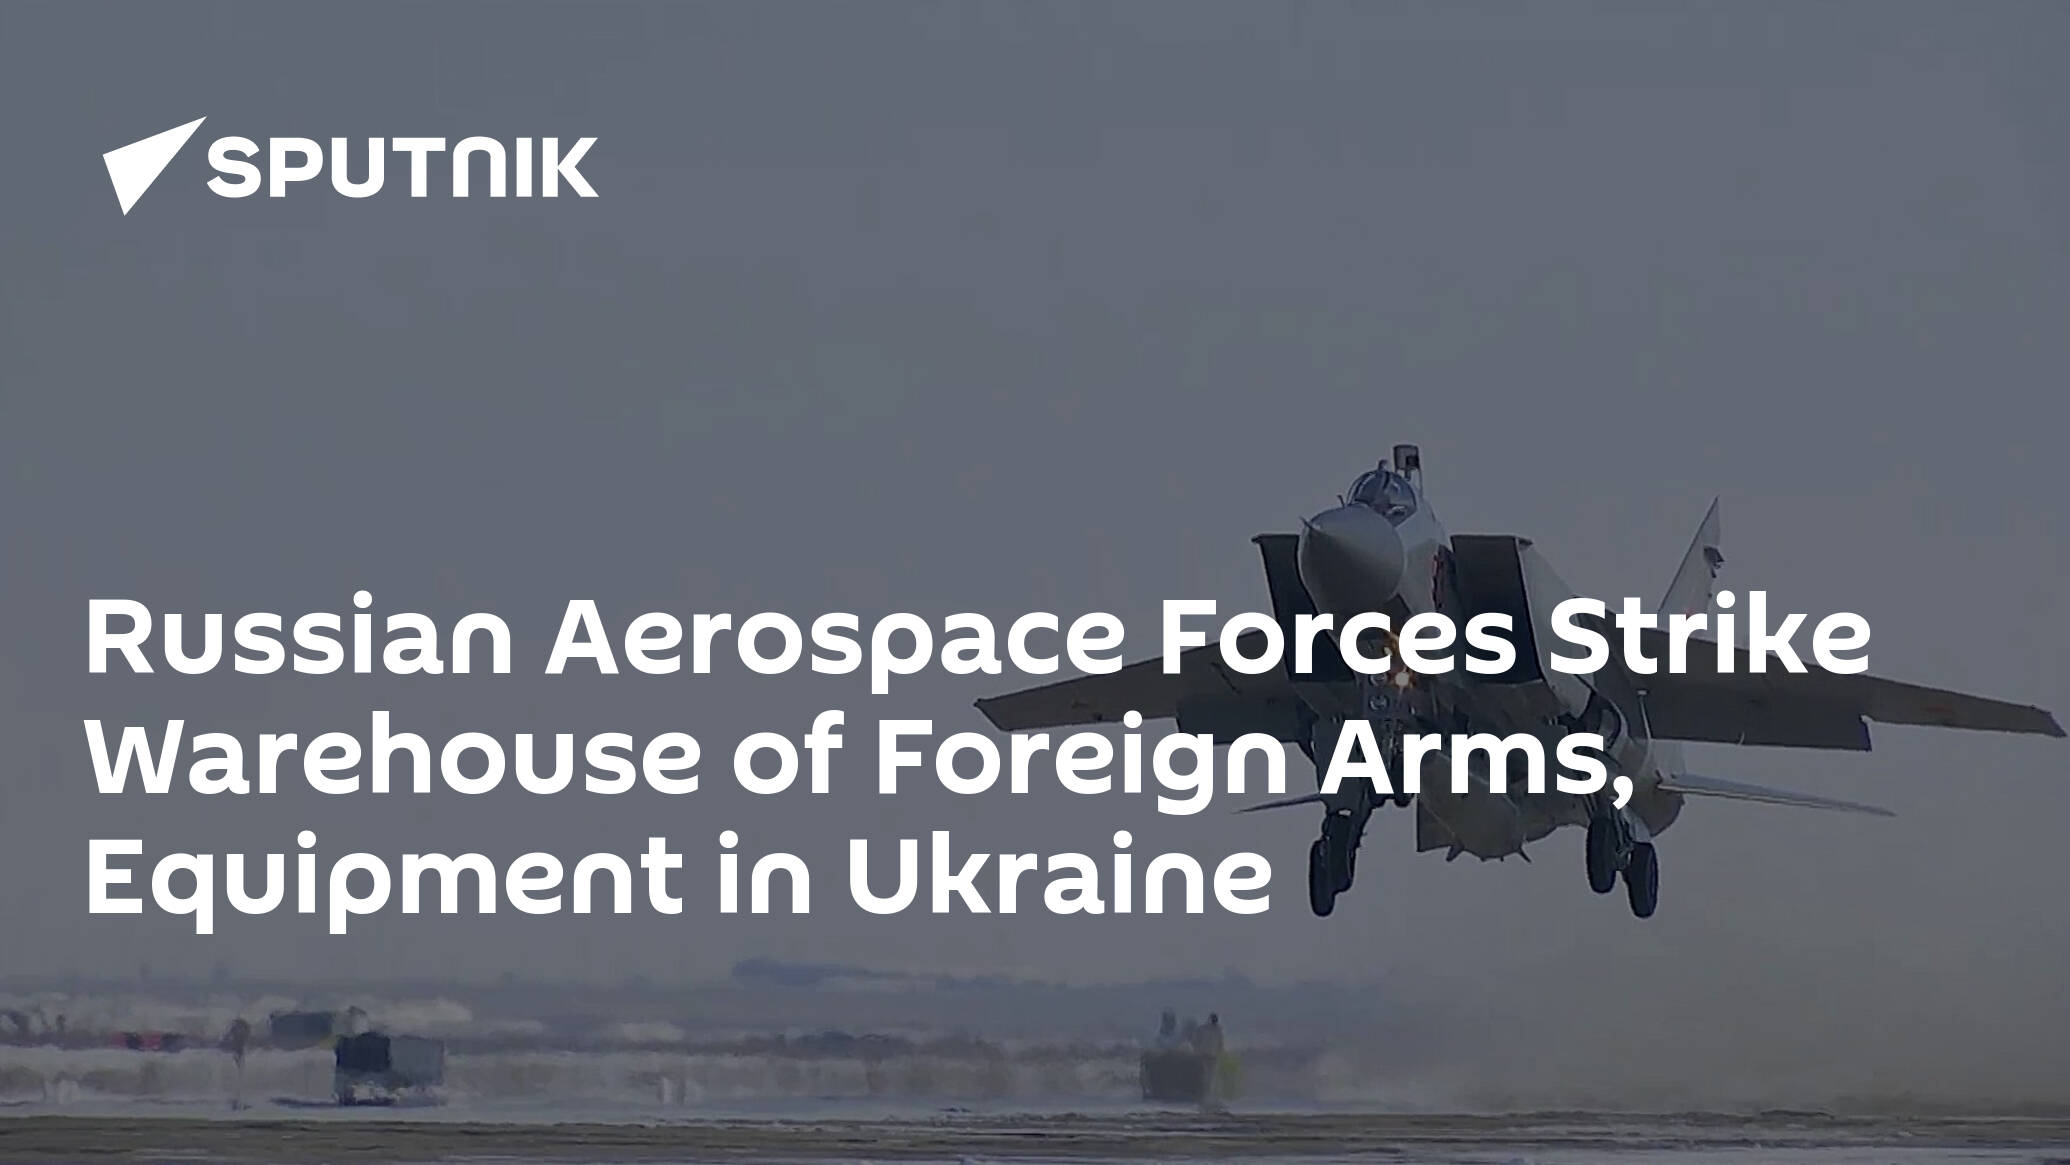 Russian Aerospace Forces Strike Warehouse of Foreign Arms, Equipment in Ukraine